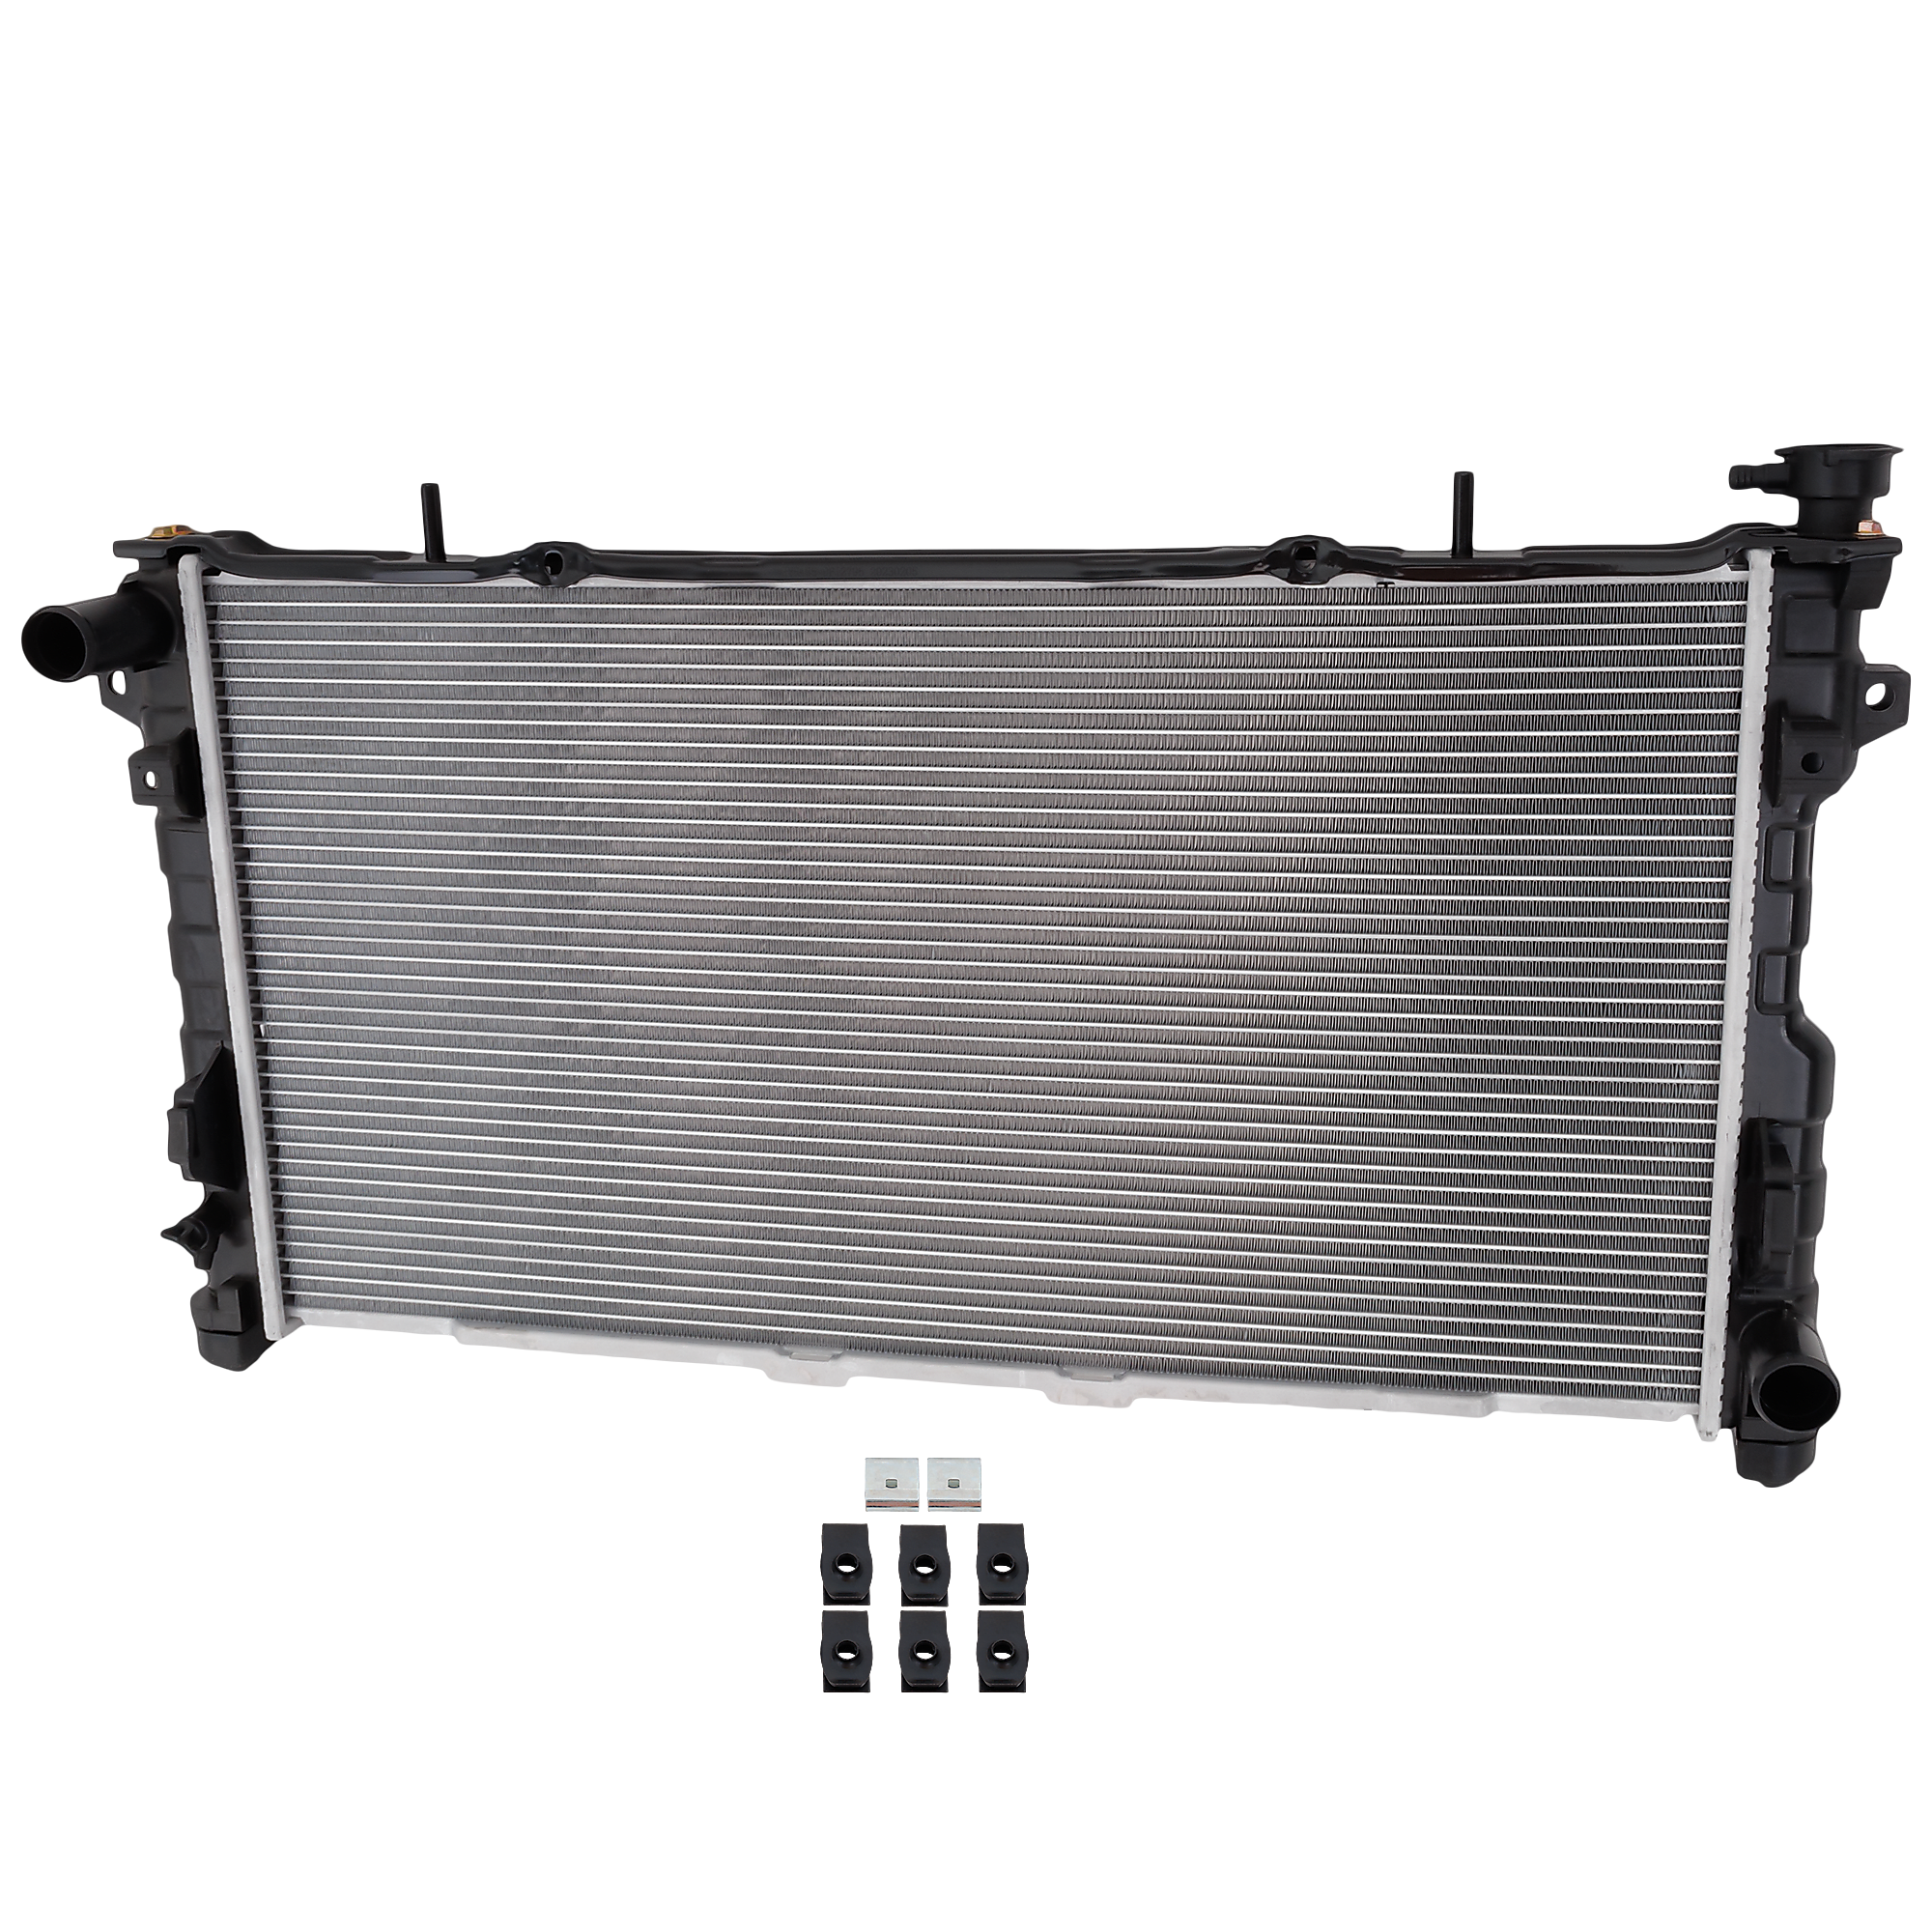 BRAND NEW RADIATOR #1 QUALITY & SERVICE PLEASE COMPARE OUR RATINGS1.5 1.8 L4